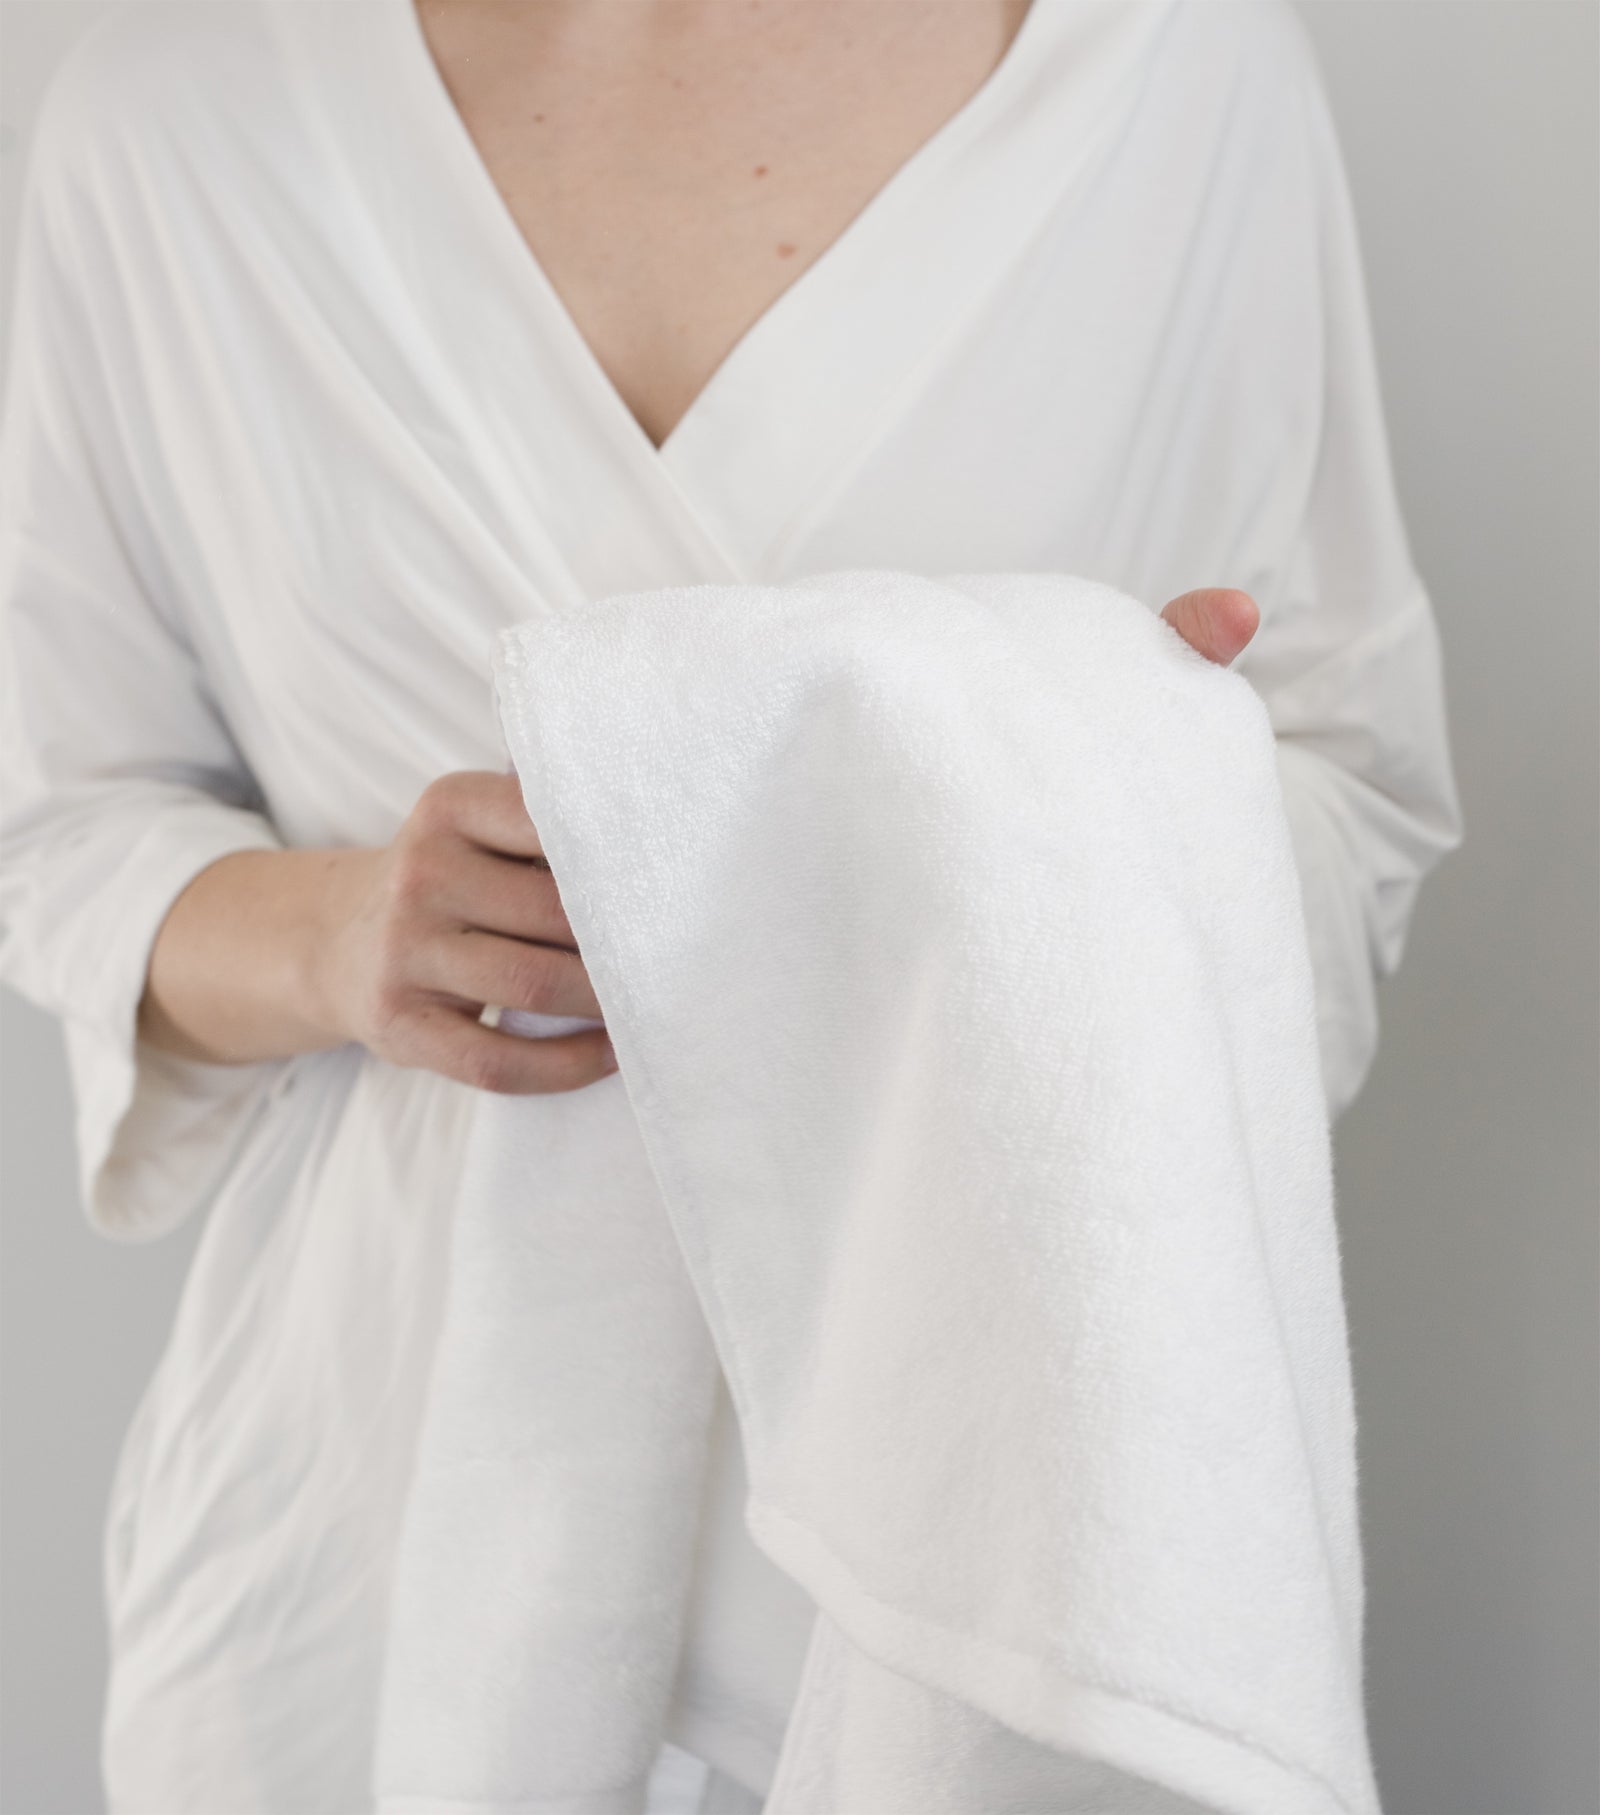 Premium Plush Bath Towel in the color White. Photo of White Premium Plush Bath Towel taken with women wrapped in the premium plush bath towel. The photo is shot from the neck to the torso. 